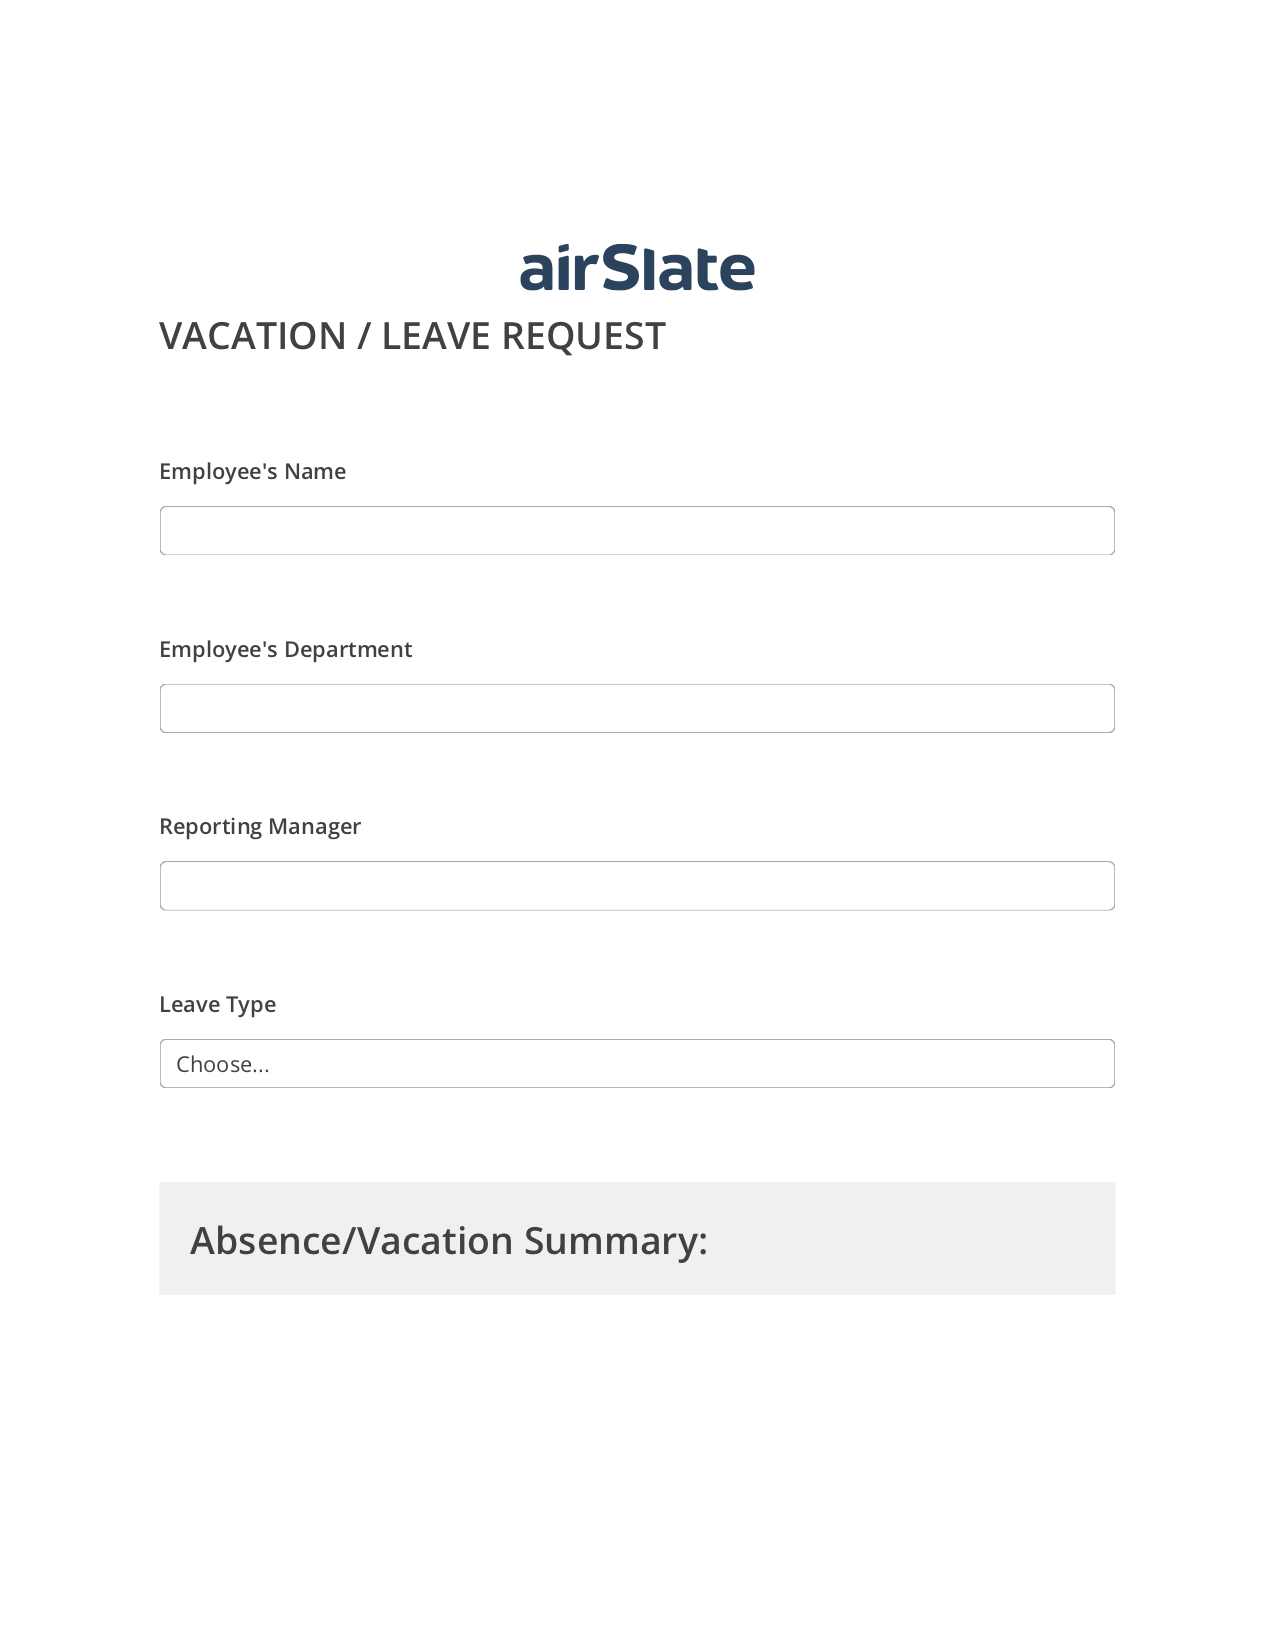 Vacation/Leave Request Flow Update Salesforce Record Bot